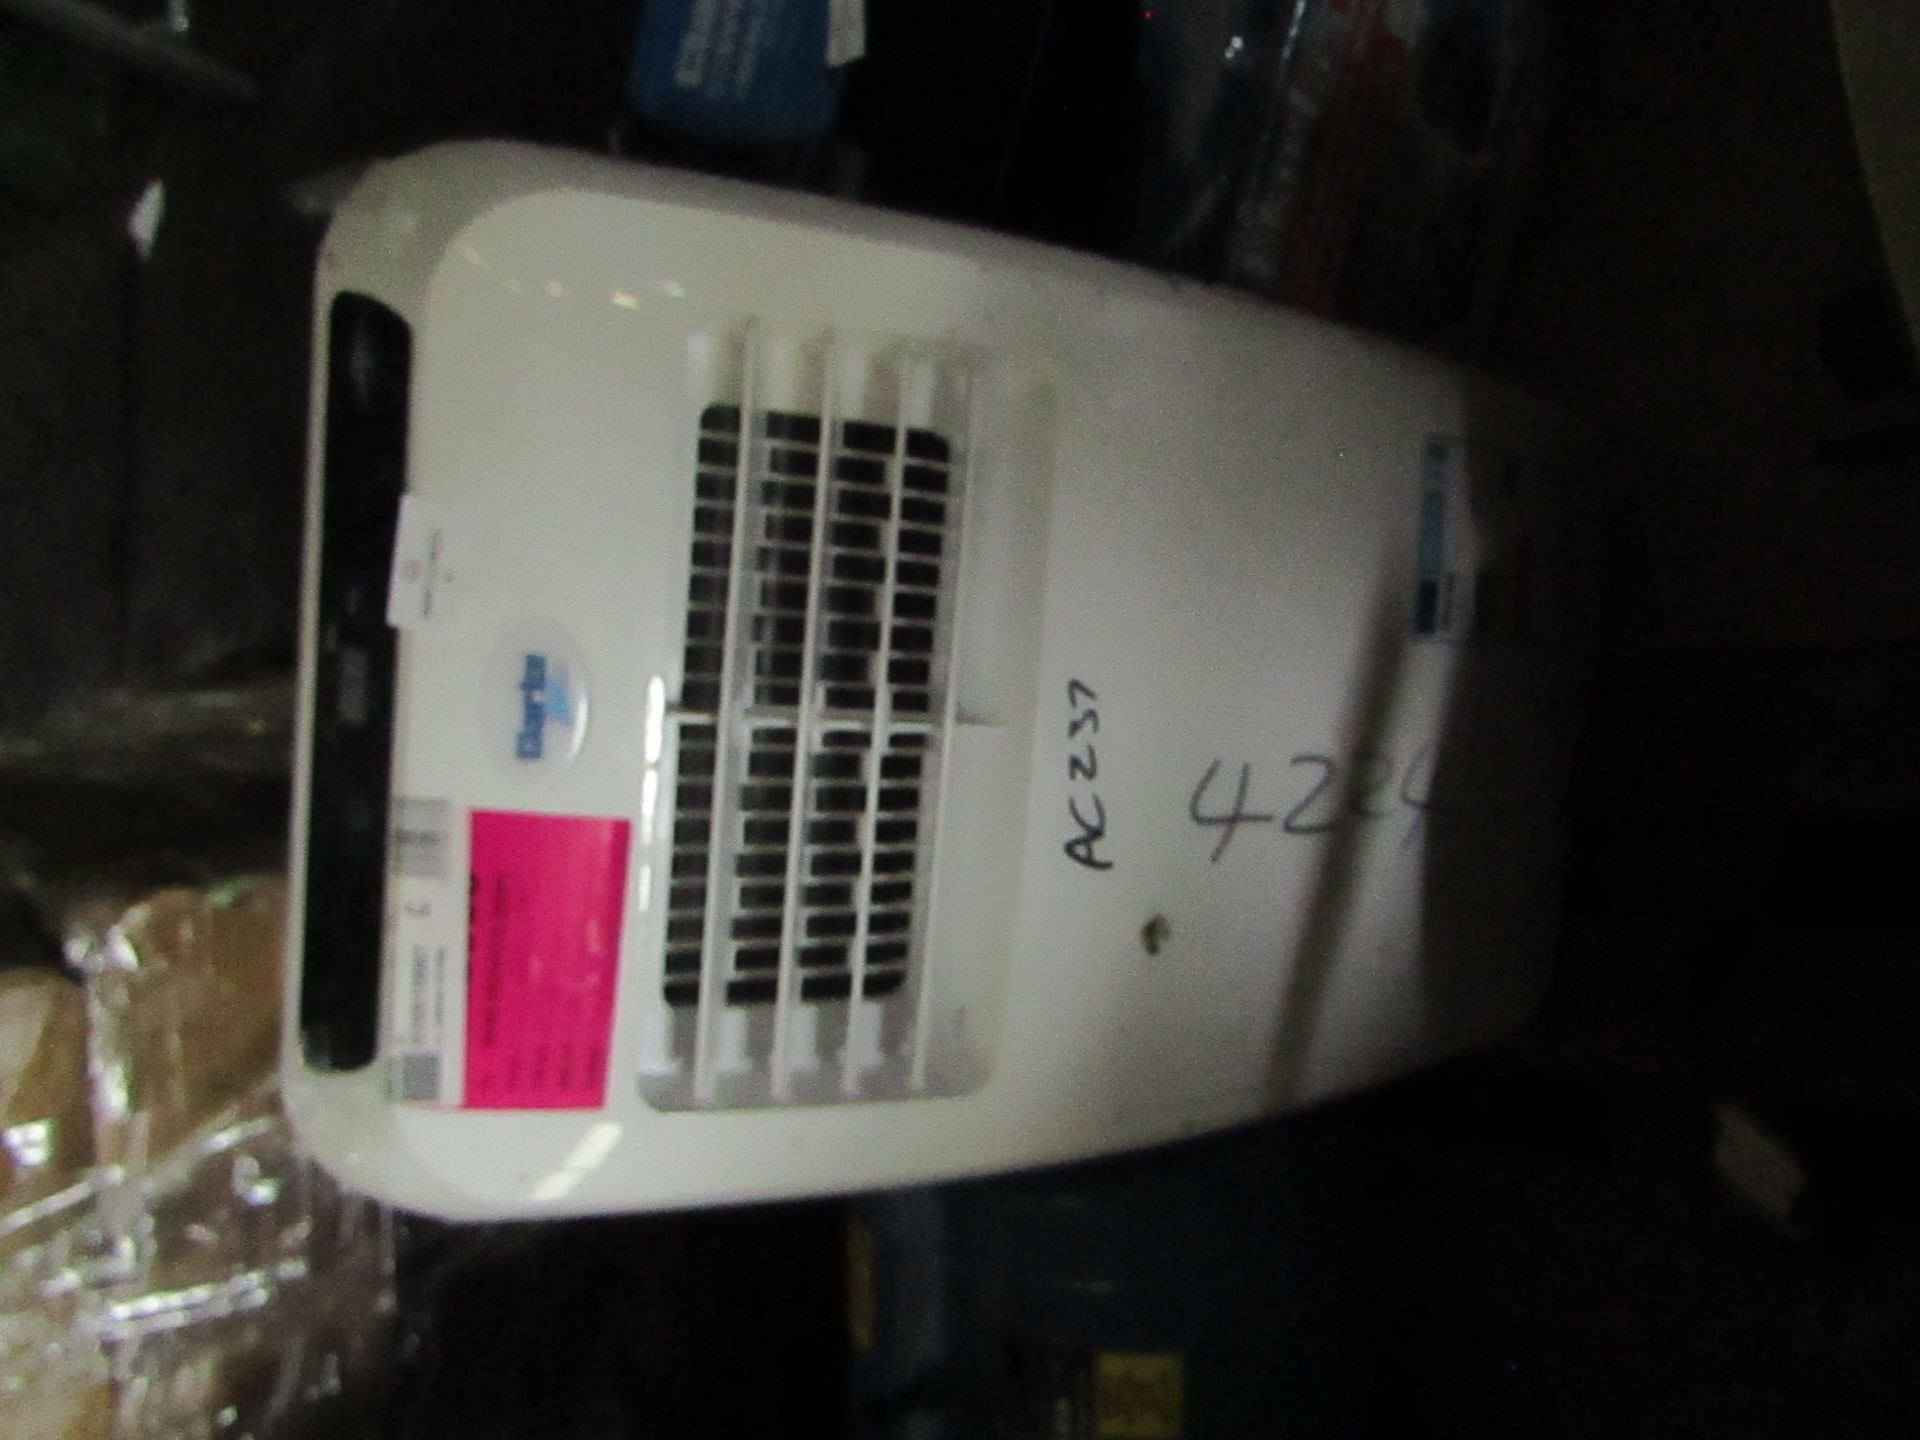 1x CL AIRCON AC7050 230 4224 This lot is a Machine Mart product which is raw and completely